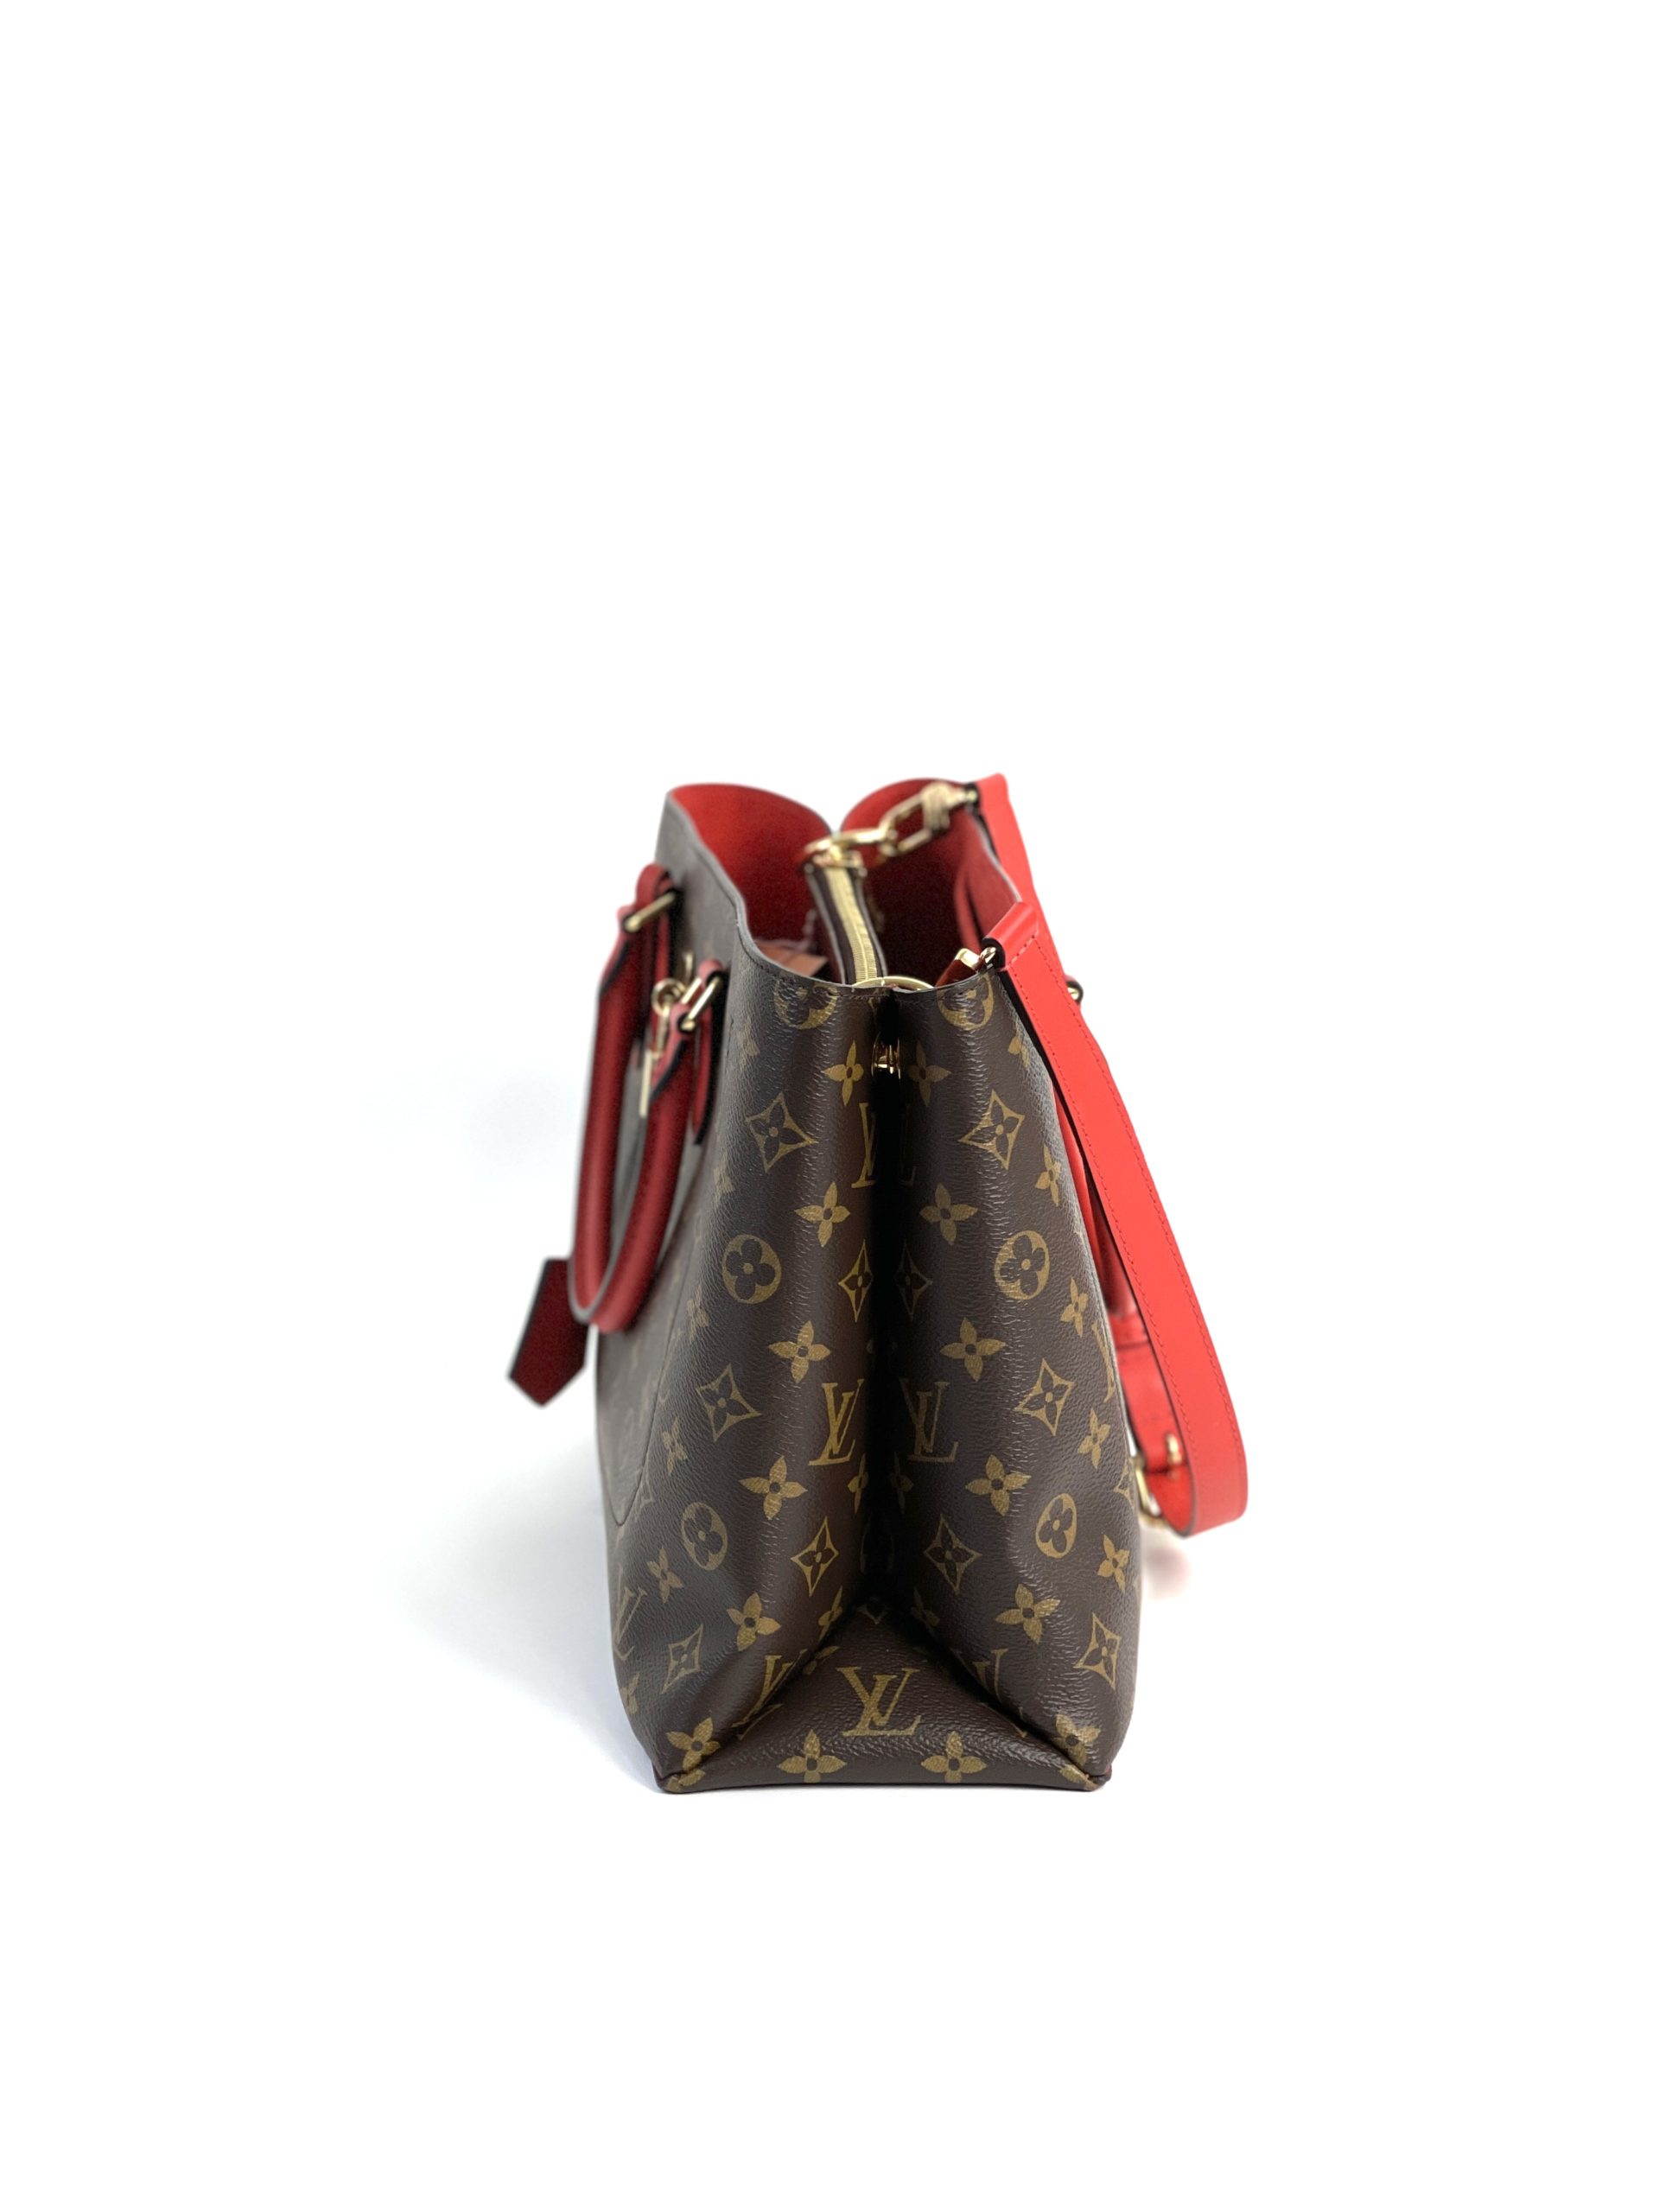 LOUIS VUITTON Monogram Flower Tote Hand Bag Coquelicot 2way M43553 Auth  ro306A